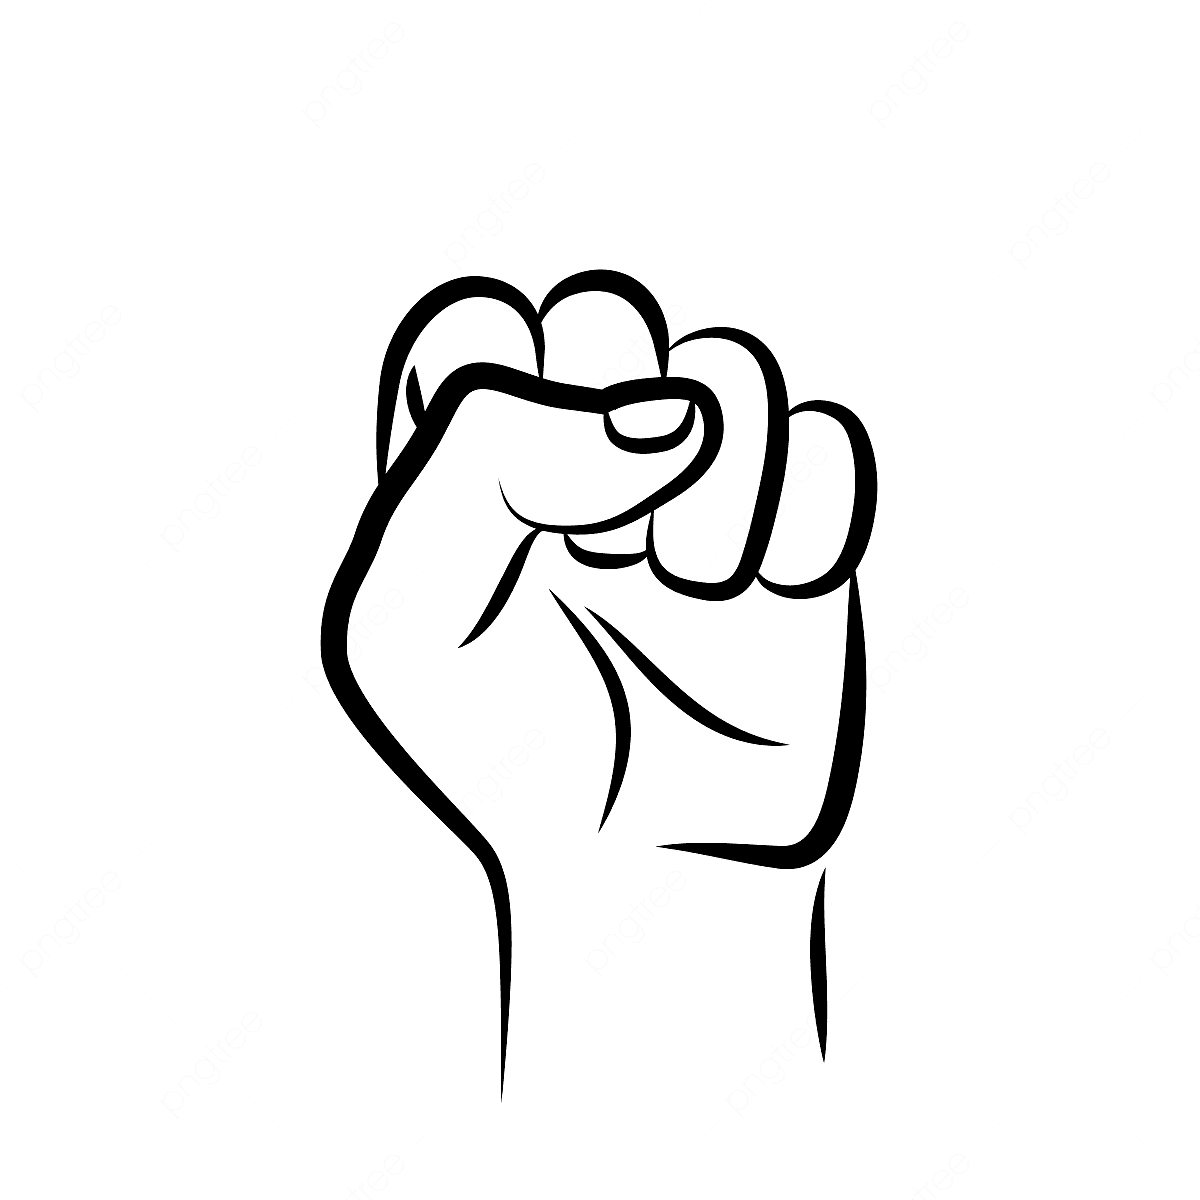 Closed Fist Vector Clipart